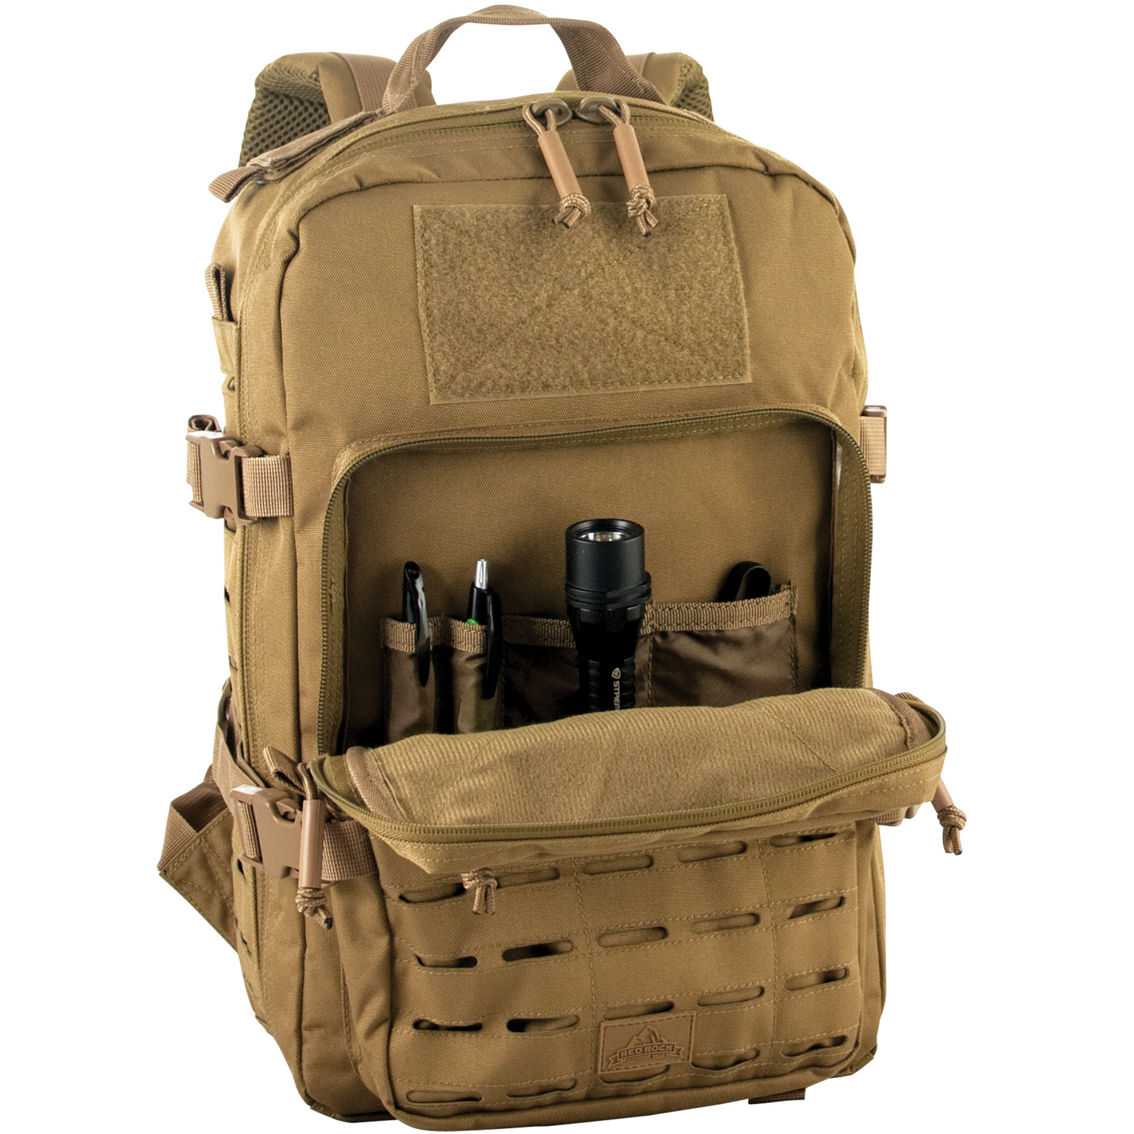 Red Rock Outdoor Gear Transporter Day Pack - Image 7 of 9